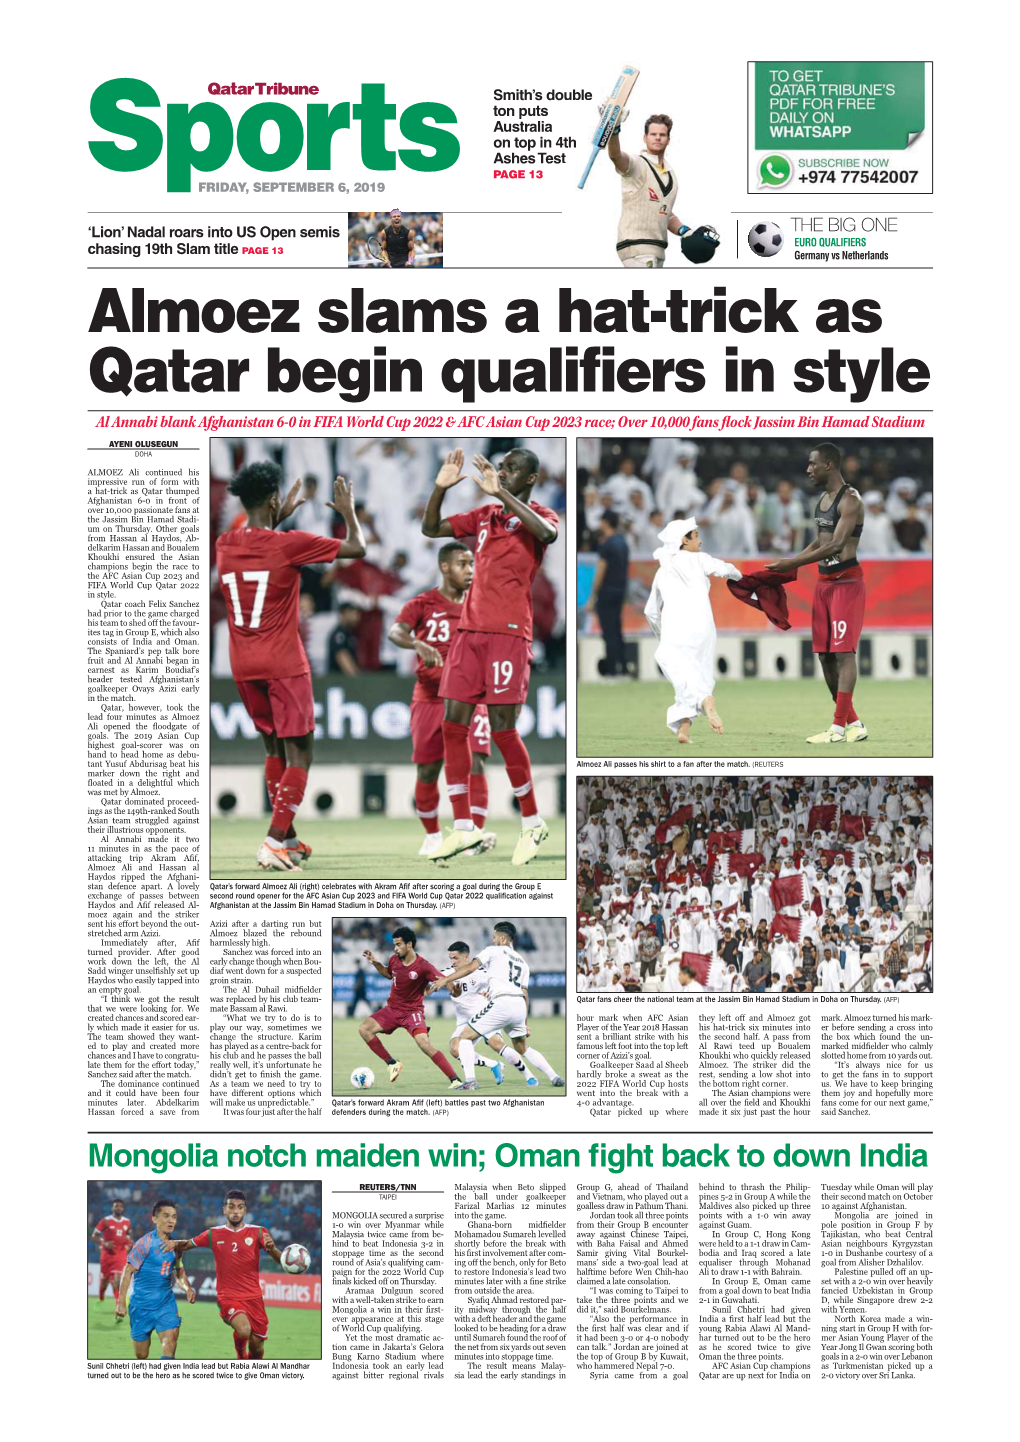 Almoez Slams a Hat-Trick As Qatar Begin Qualifiers in Style